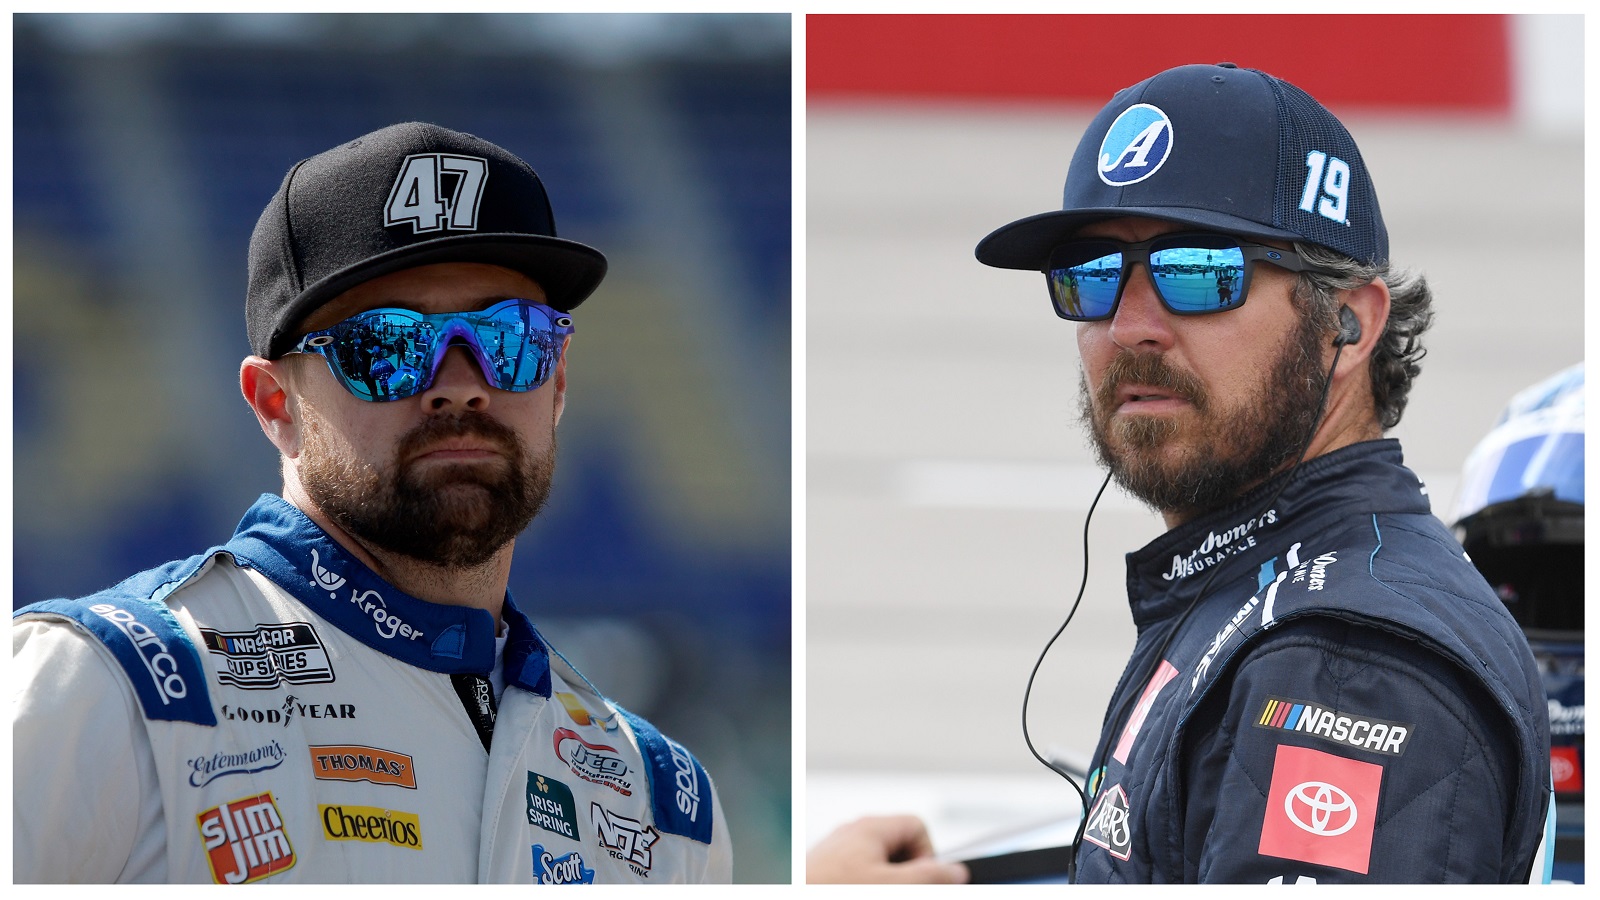 Ricky Stenhouse Jr. and Martin Truex Jr. just removed some of the suspense from NASCAR Silly Season. | Getty Images